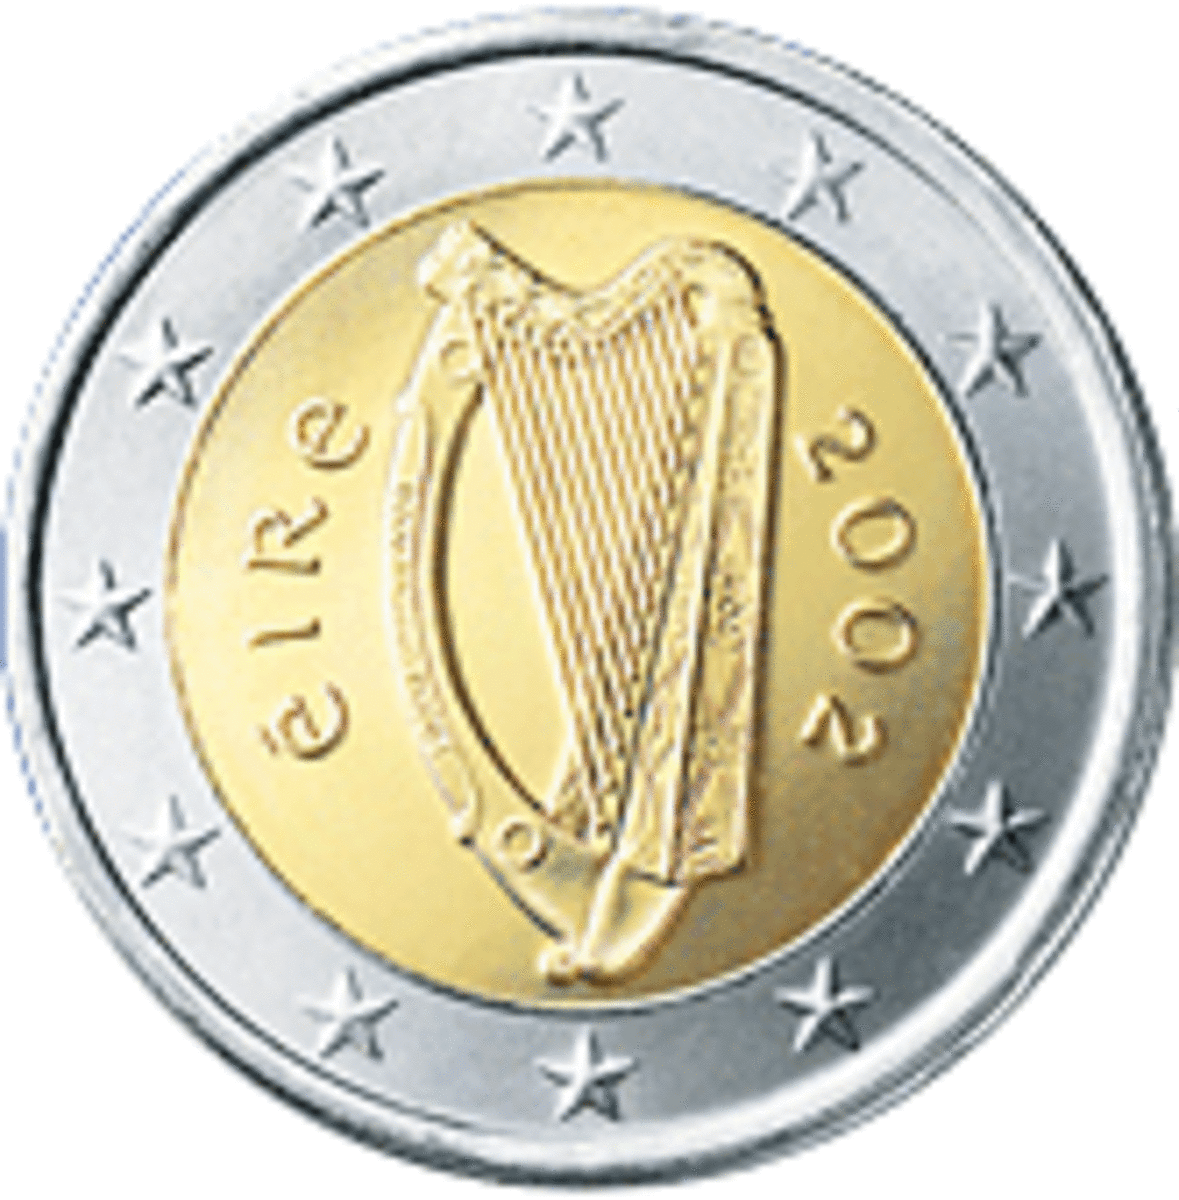 Euro coins are always interesting, because you never know which country's symbol will be on the next coin to come out of your pocket. Here's an Irish 2 Euro coin.